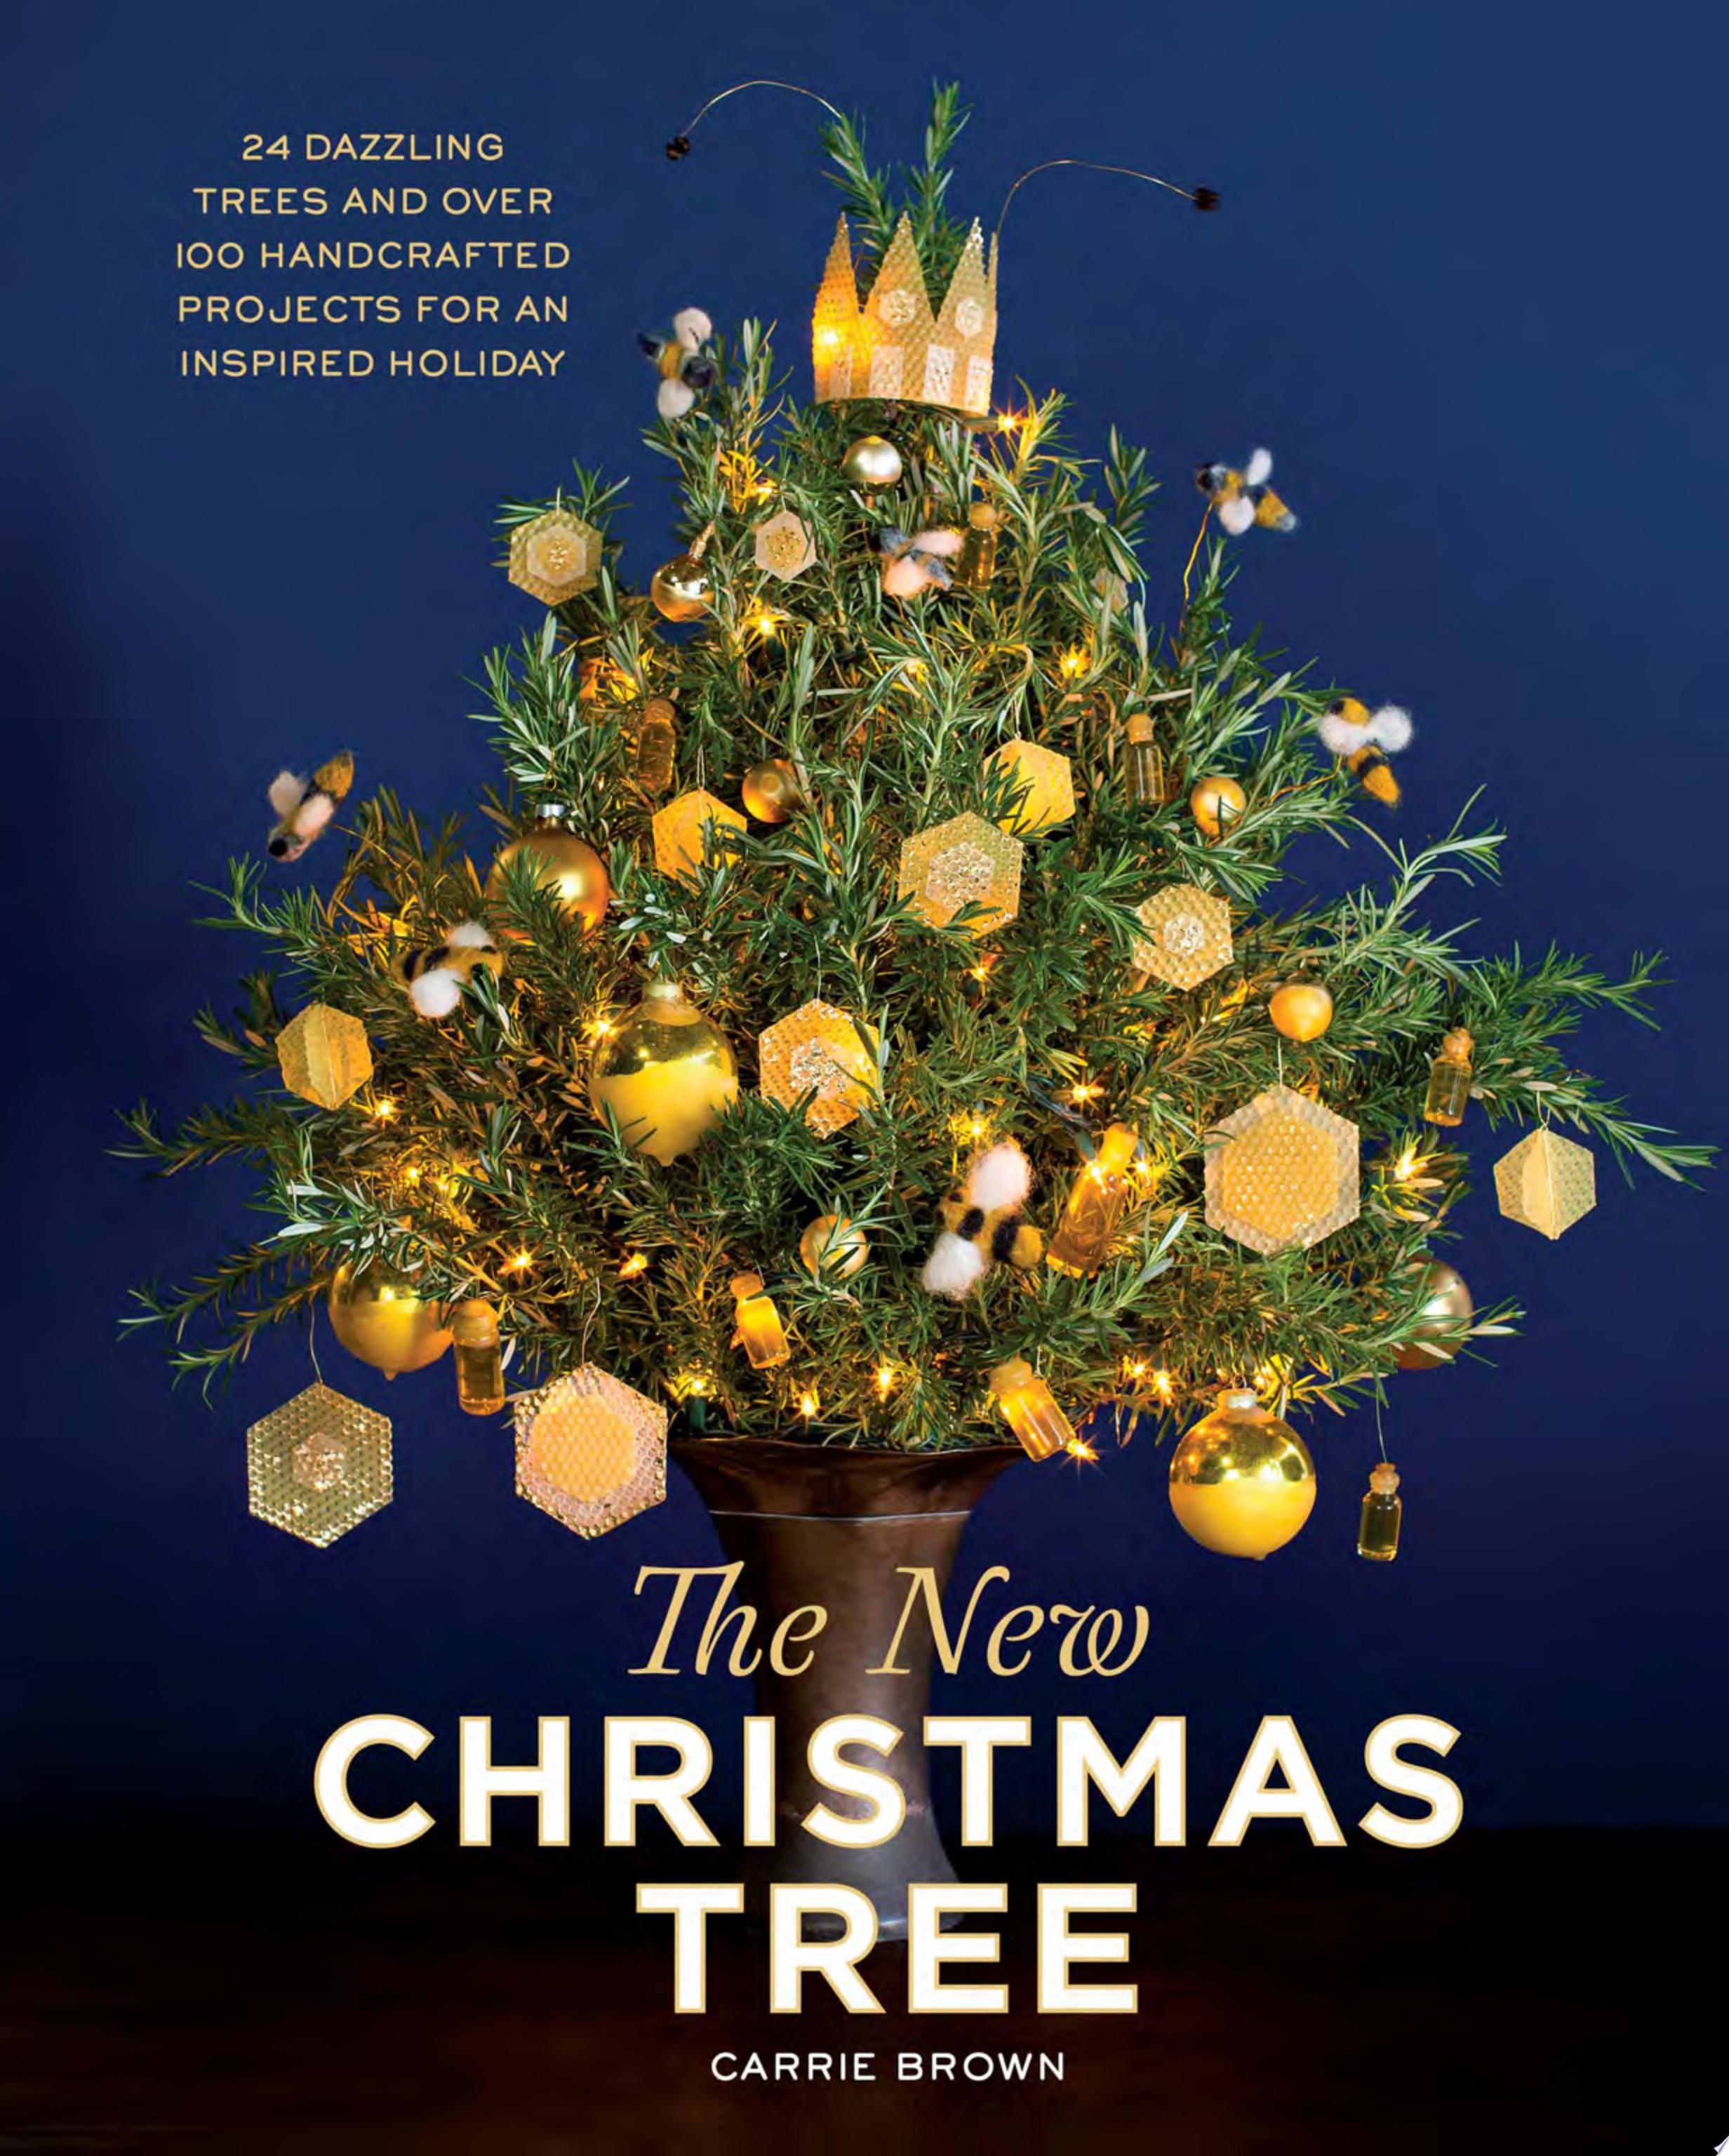 Image for "The New Christmas Tree"